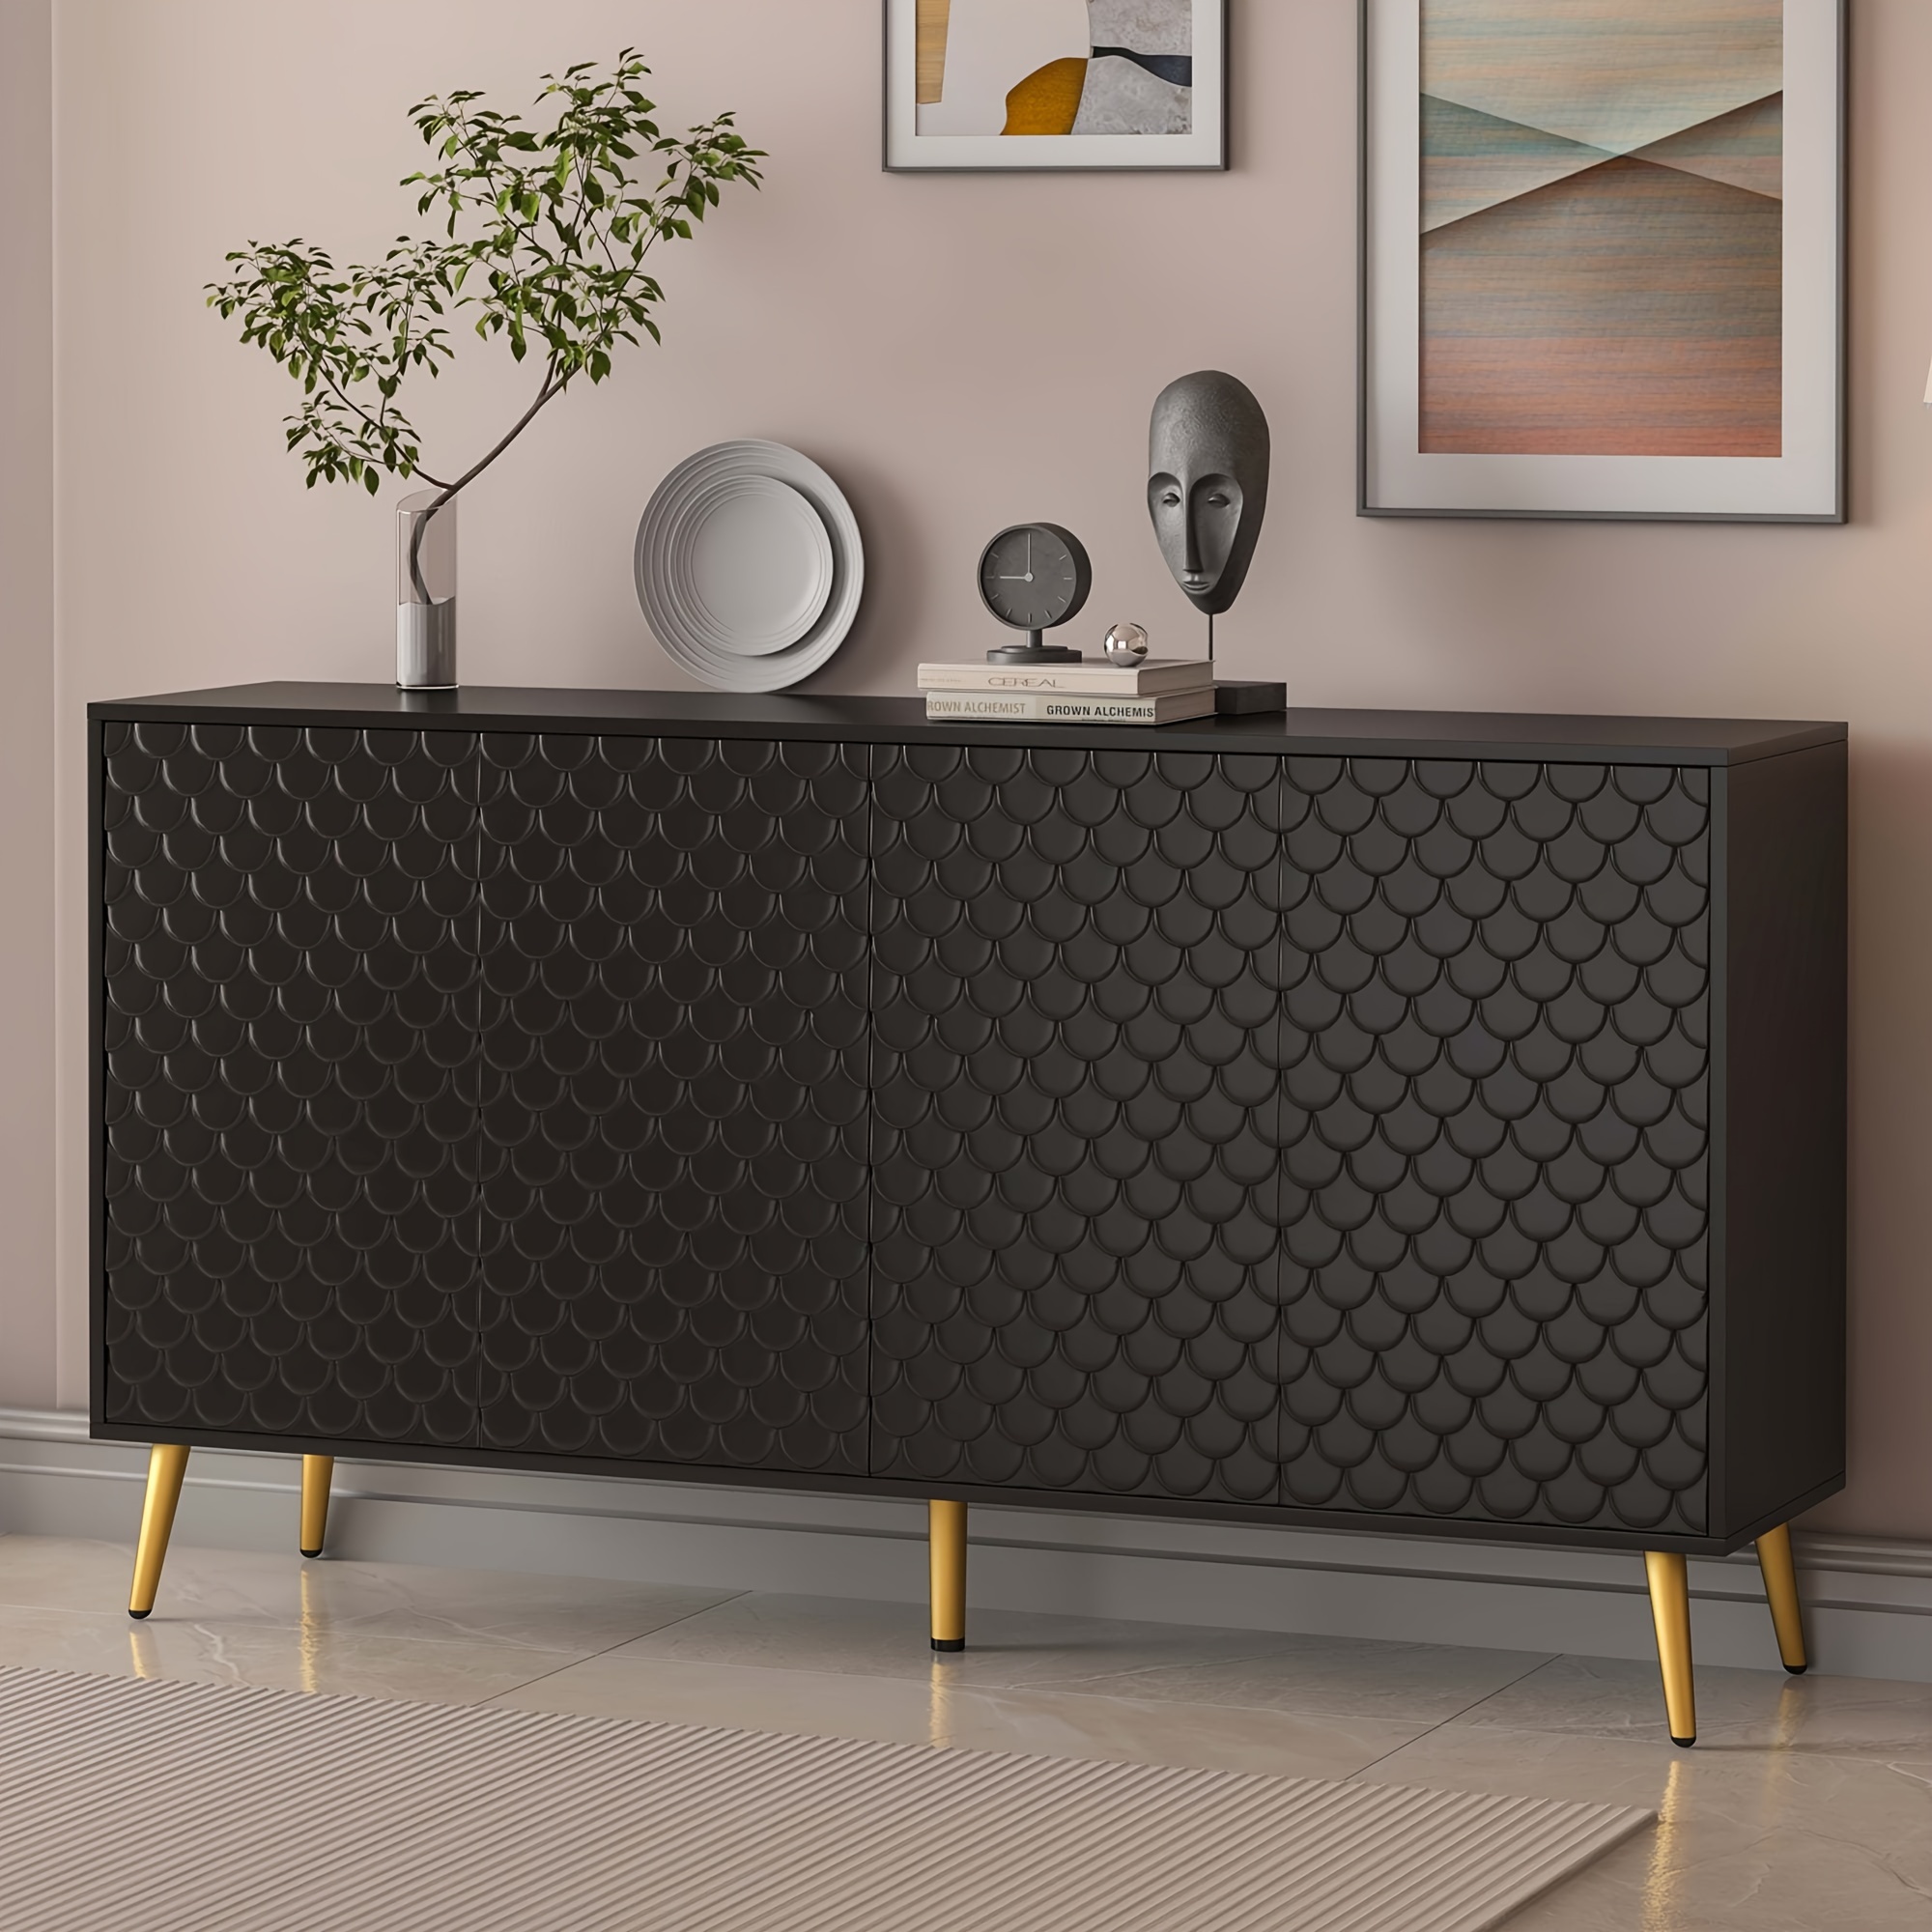 

Sideboard Buffet Storage Cabinet With Fish Scales Doors, Modern 4 Door Accent Cabinet Cupboard Console Table For Kitchen Dining Living Room Entryway